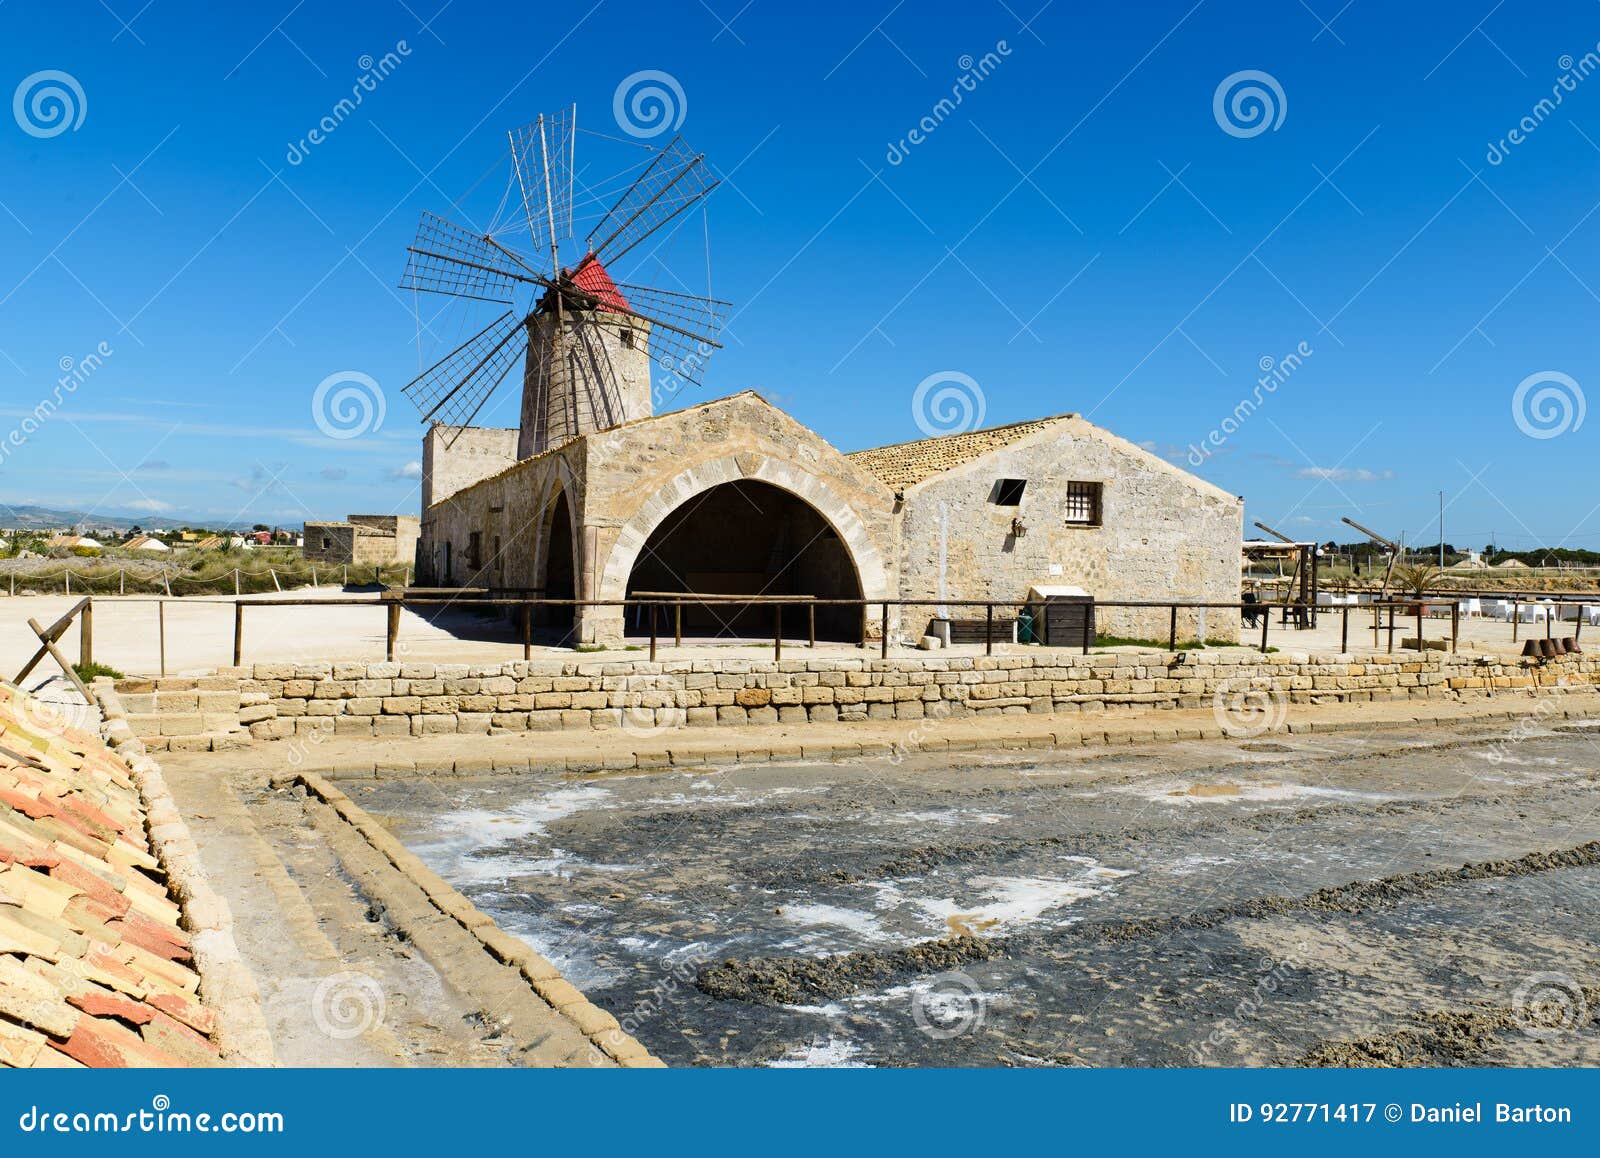 museo del sale with a windmill